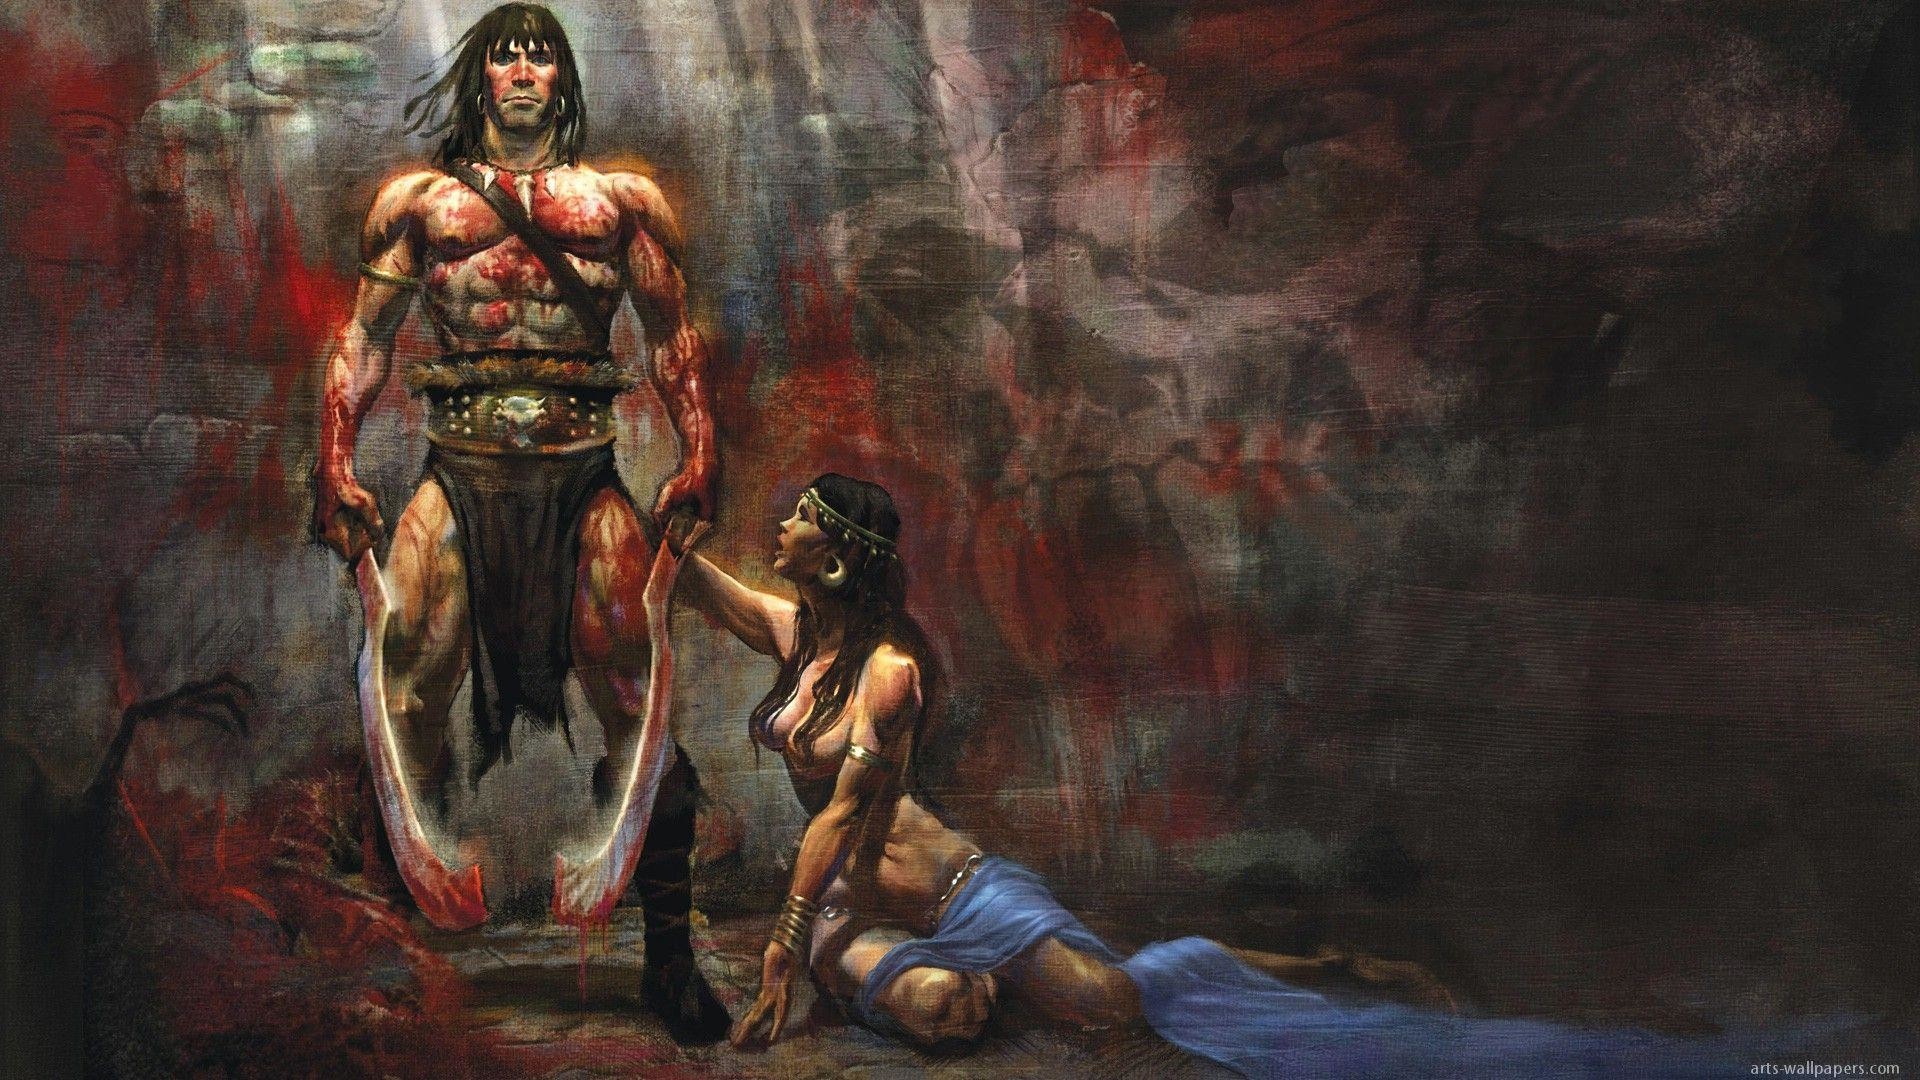 Conan The Barbarian Wallpaper Images & Pictures - Conan The Barbarian Wallpaper Hd - HD Wallpaper 